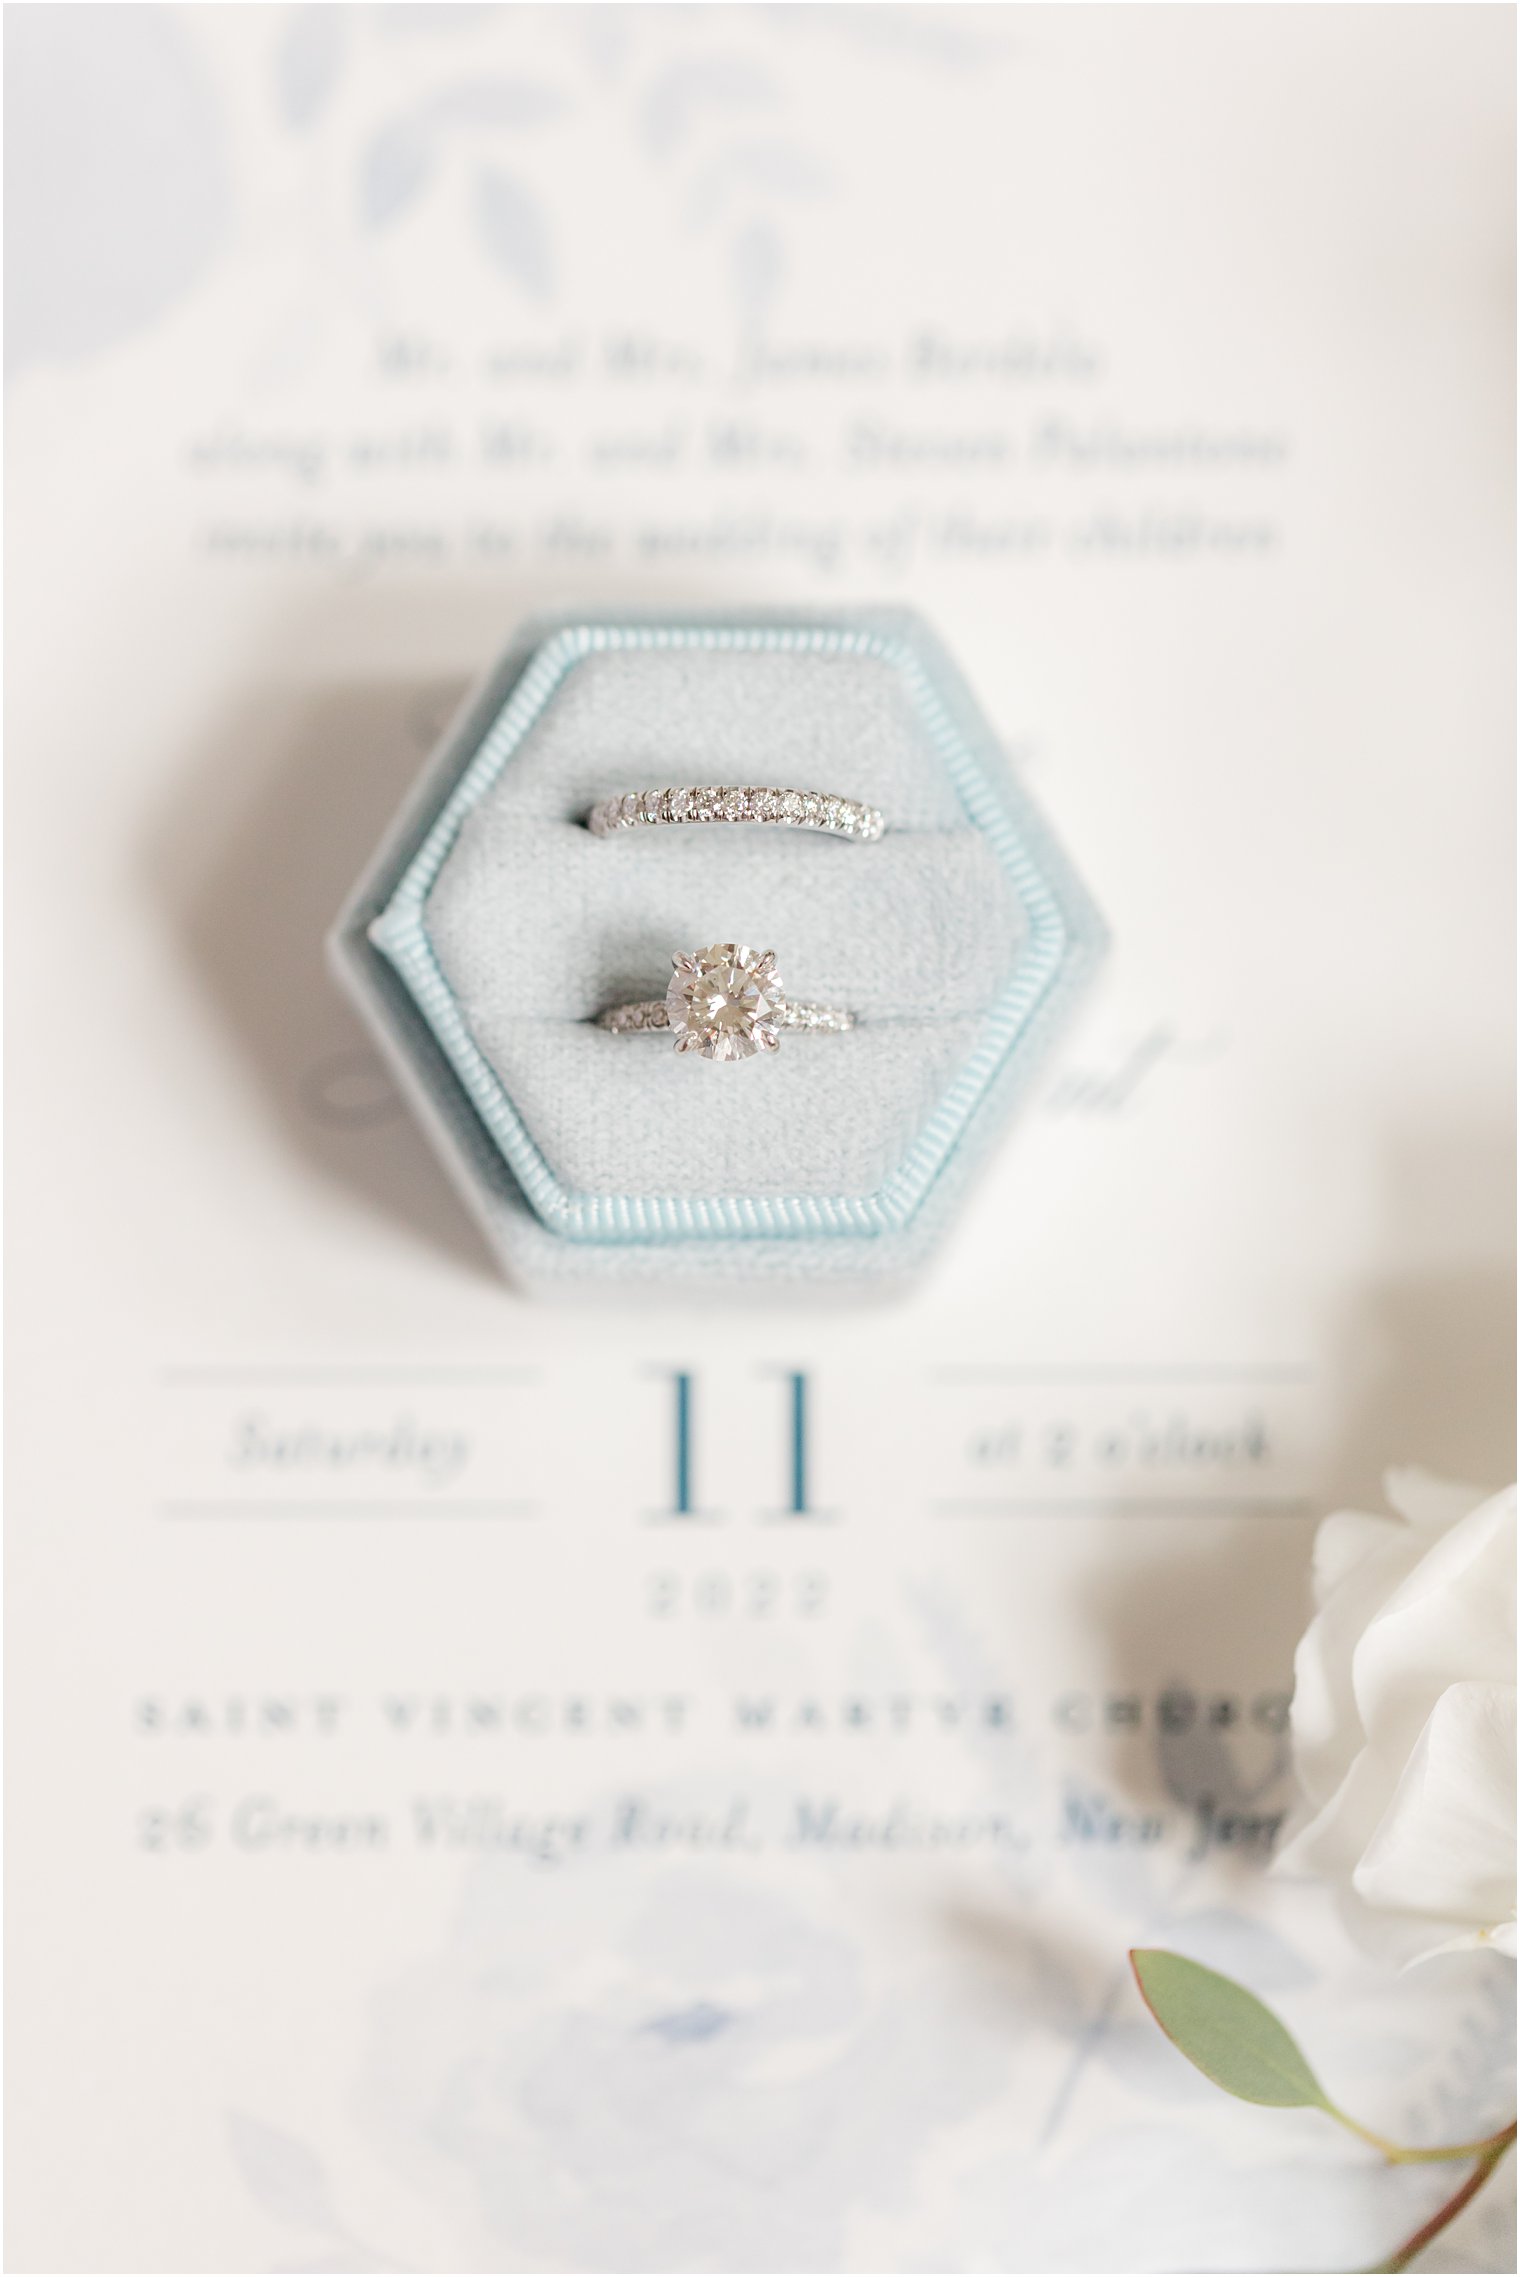 wedding rings rest in light blue box on invitation suite for Spring Brook Country Club wedding